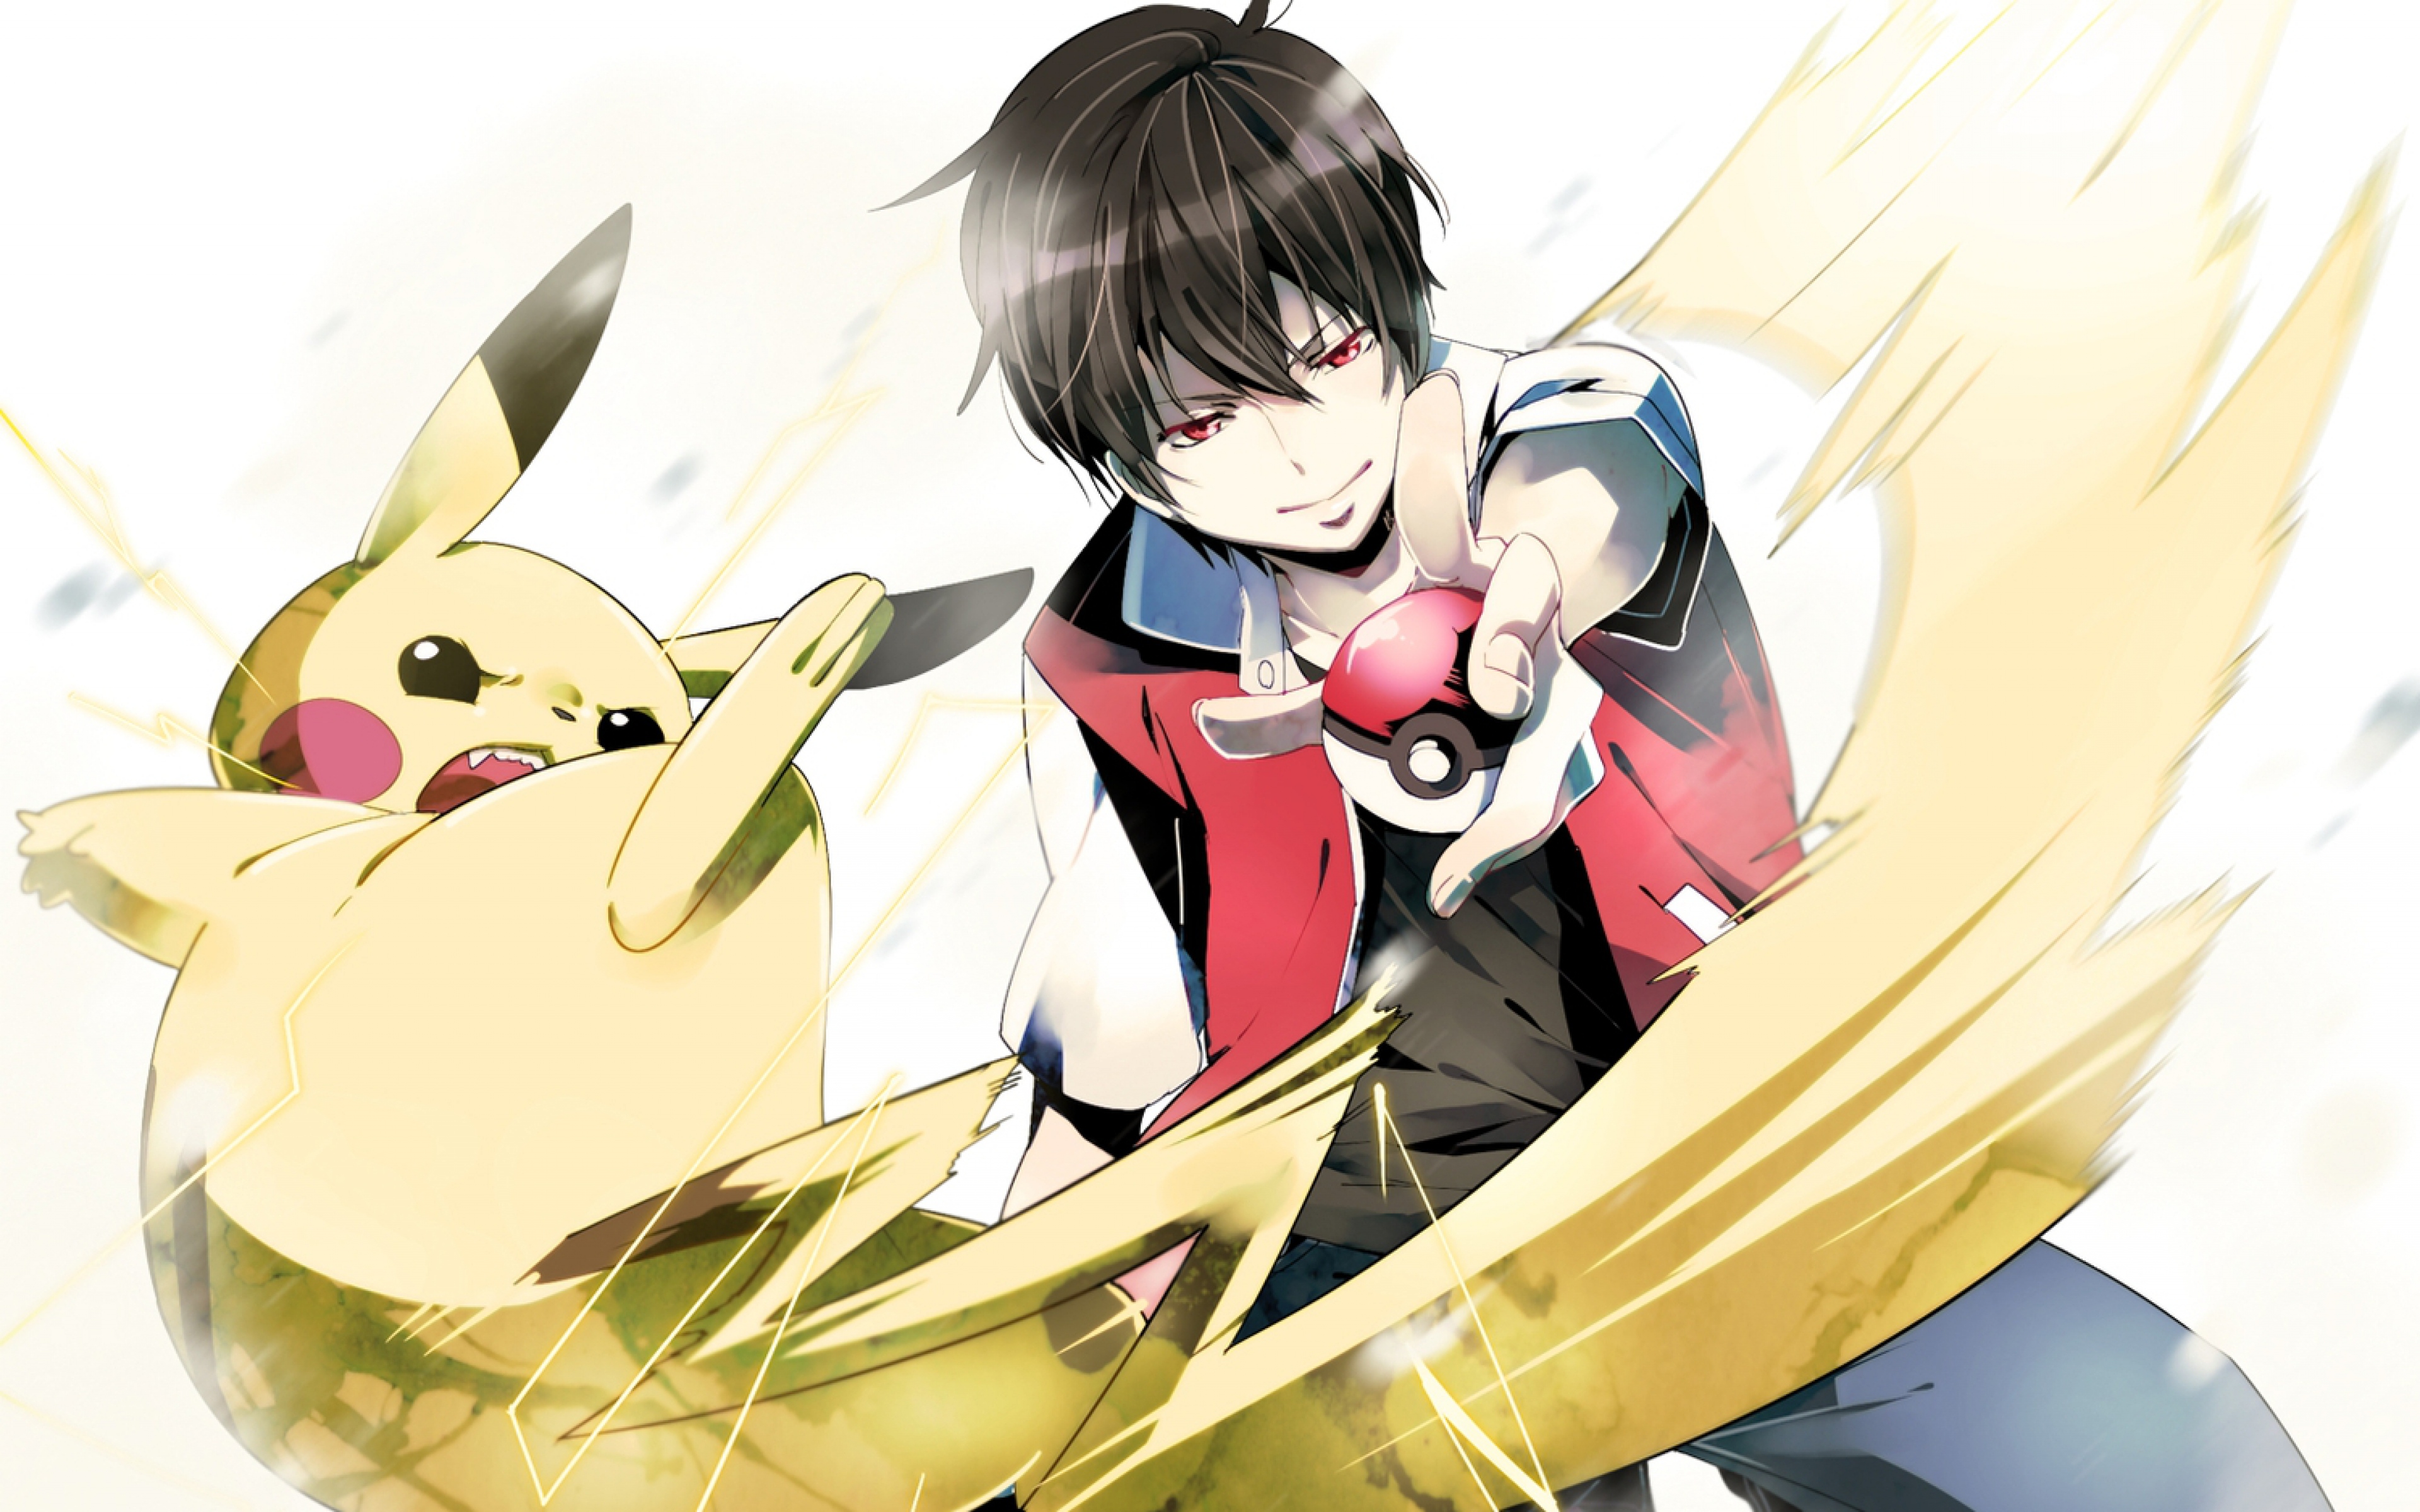 Pokemon Red and Pikachu